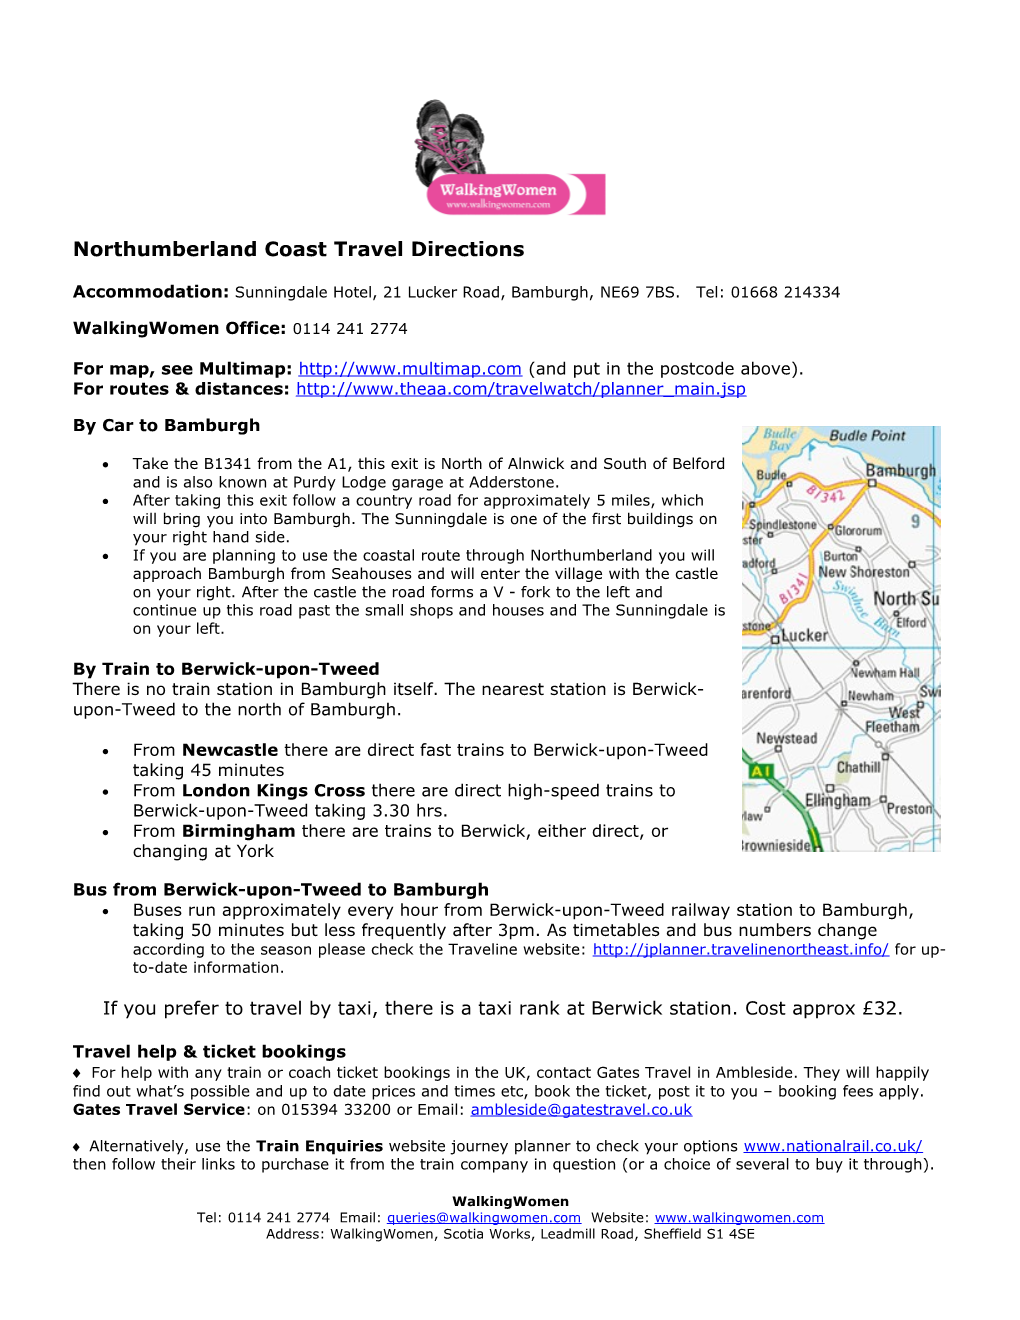 Travel Directions to Sunningdale Hotel, Northumbria